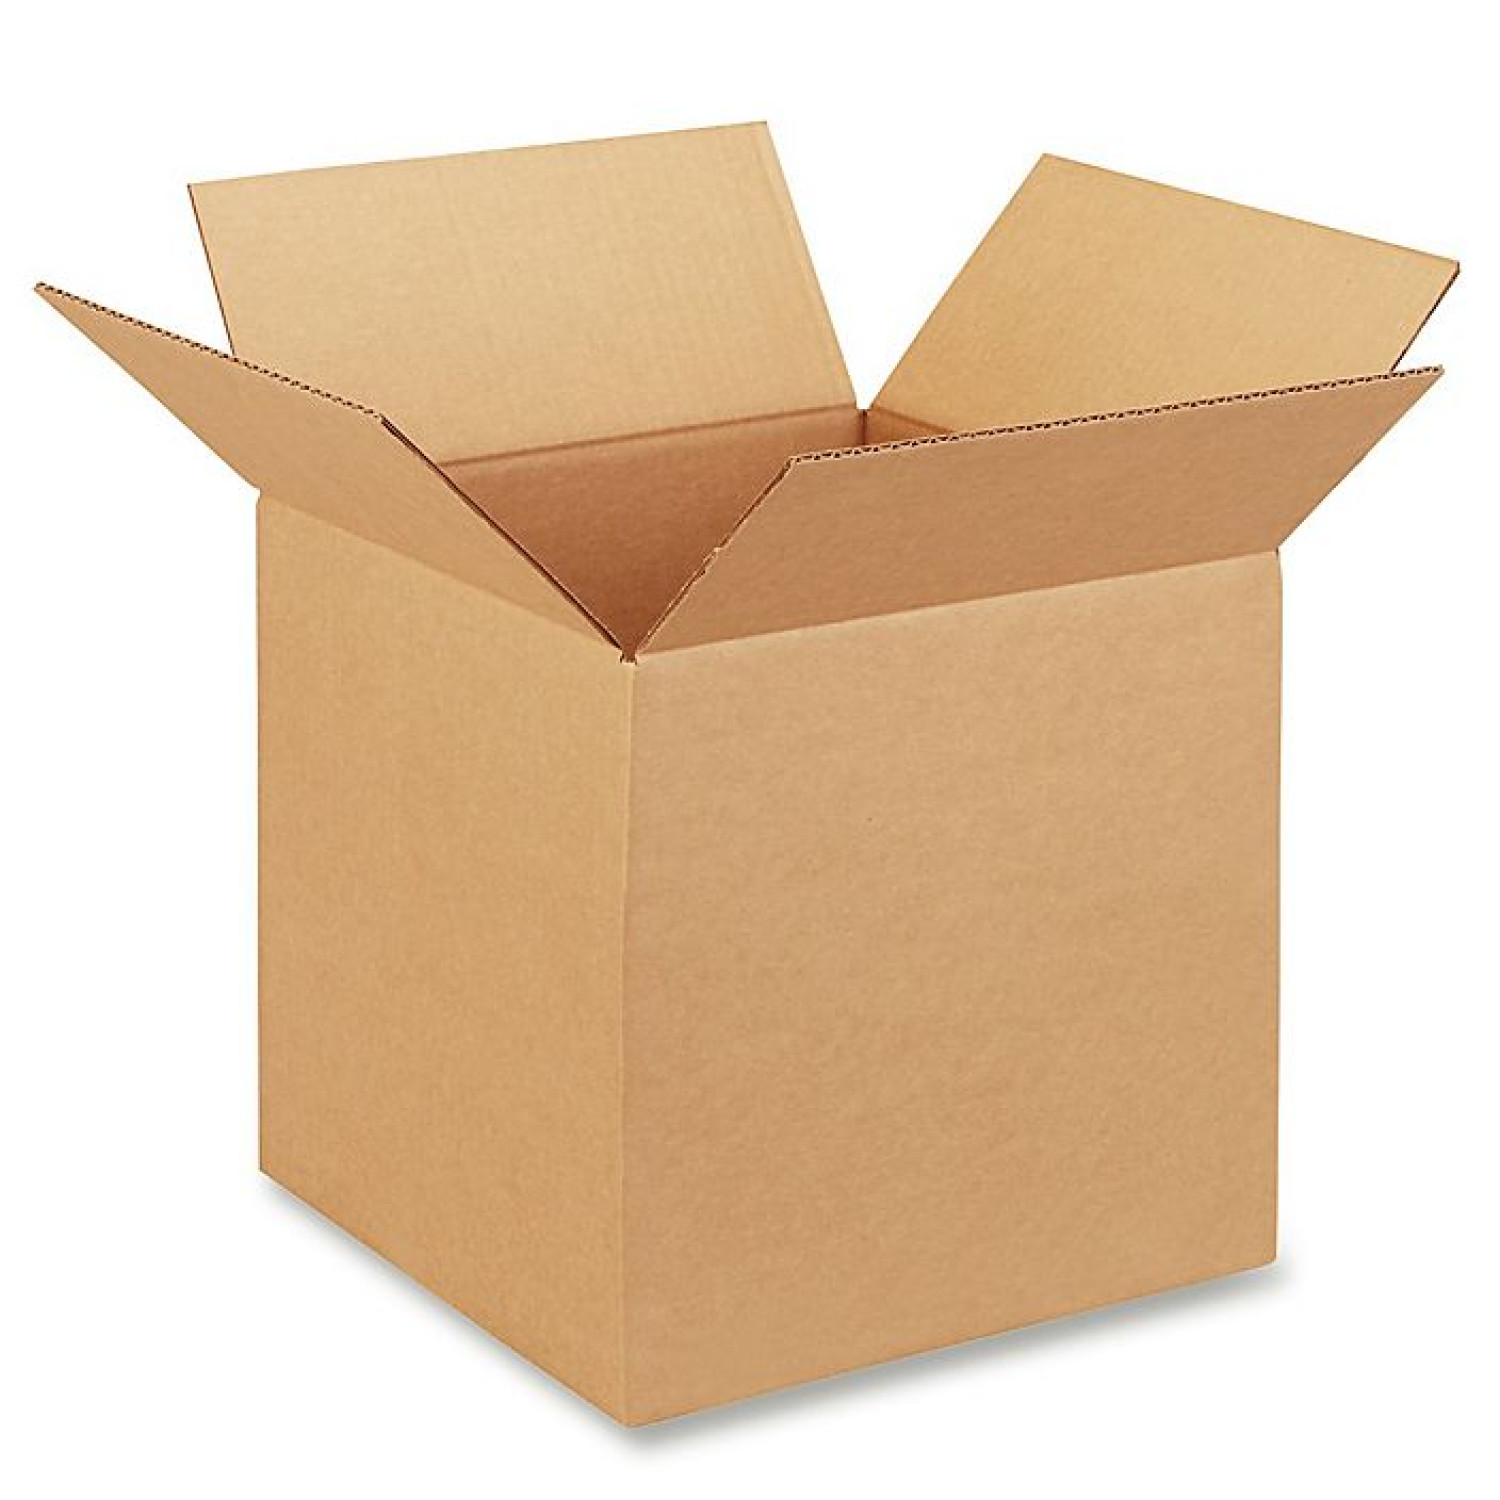 https://idlpack.com/image/cache/catalog/Products/Boxes/12-12-12-brown-corrugated-box-1500x1500.jpg